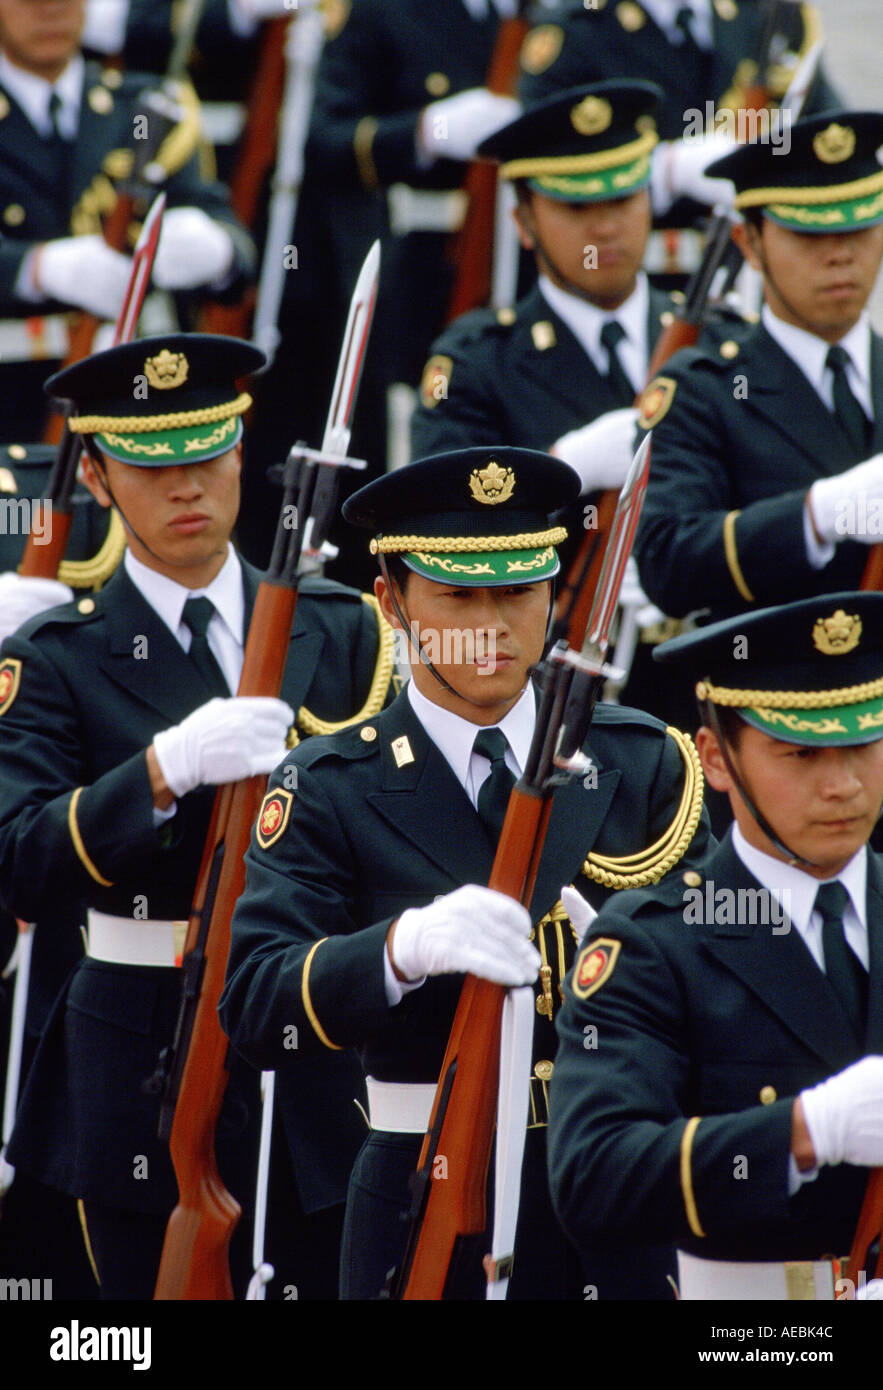 Soldiers marching Tokyo Japan Stock Photo